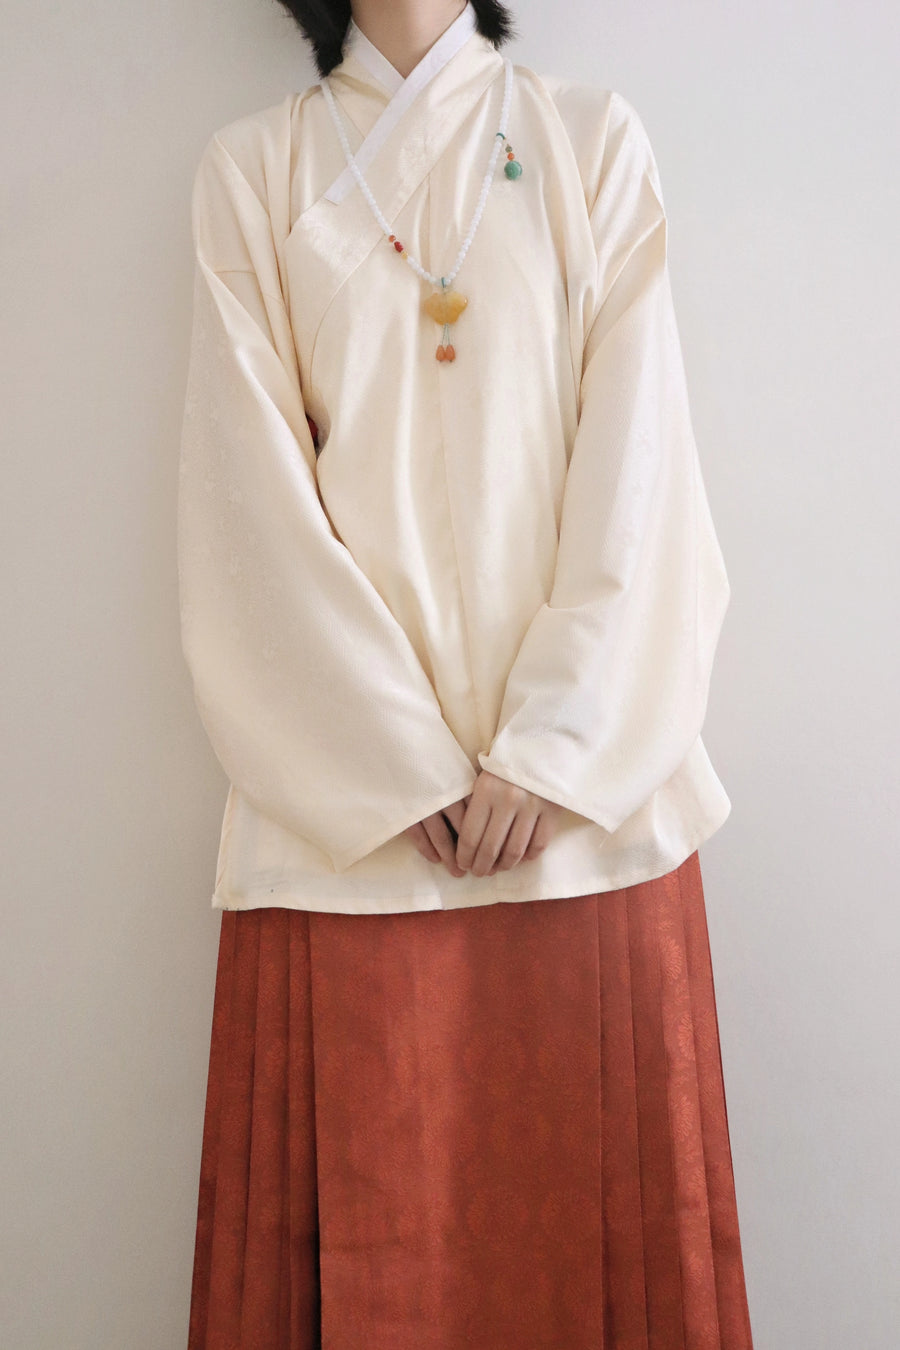 Pipa 琵琶 Lute Sleeve Middle Ming Dynasty Cross Collar Shirt